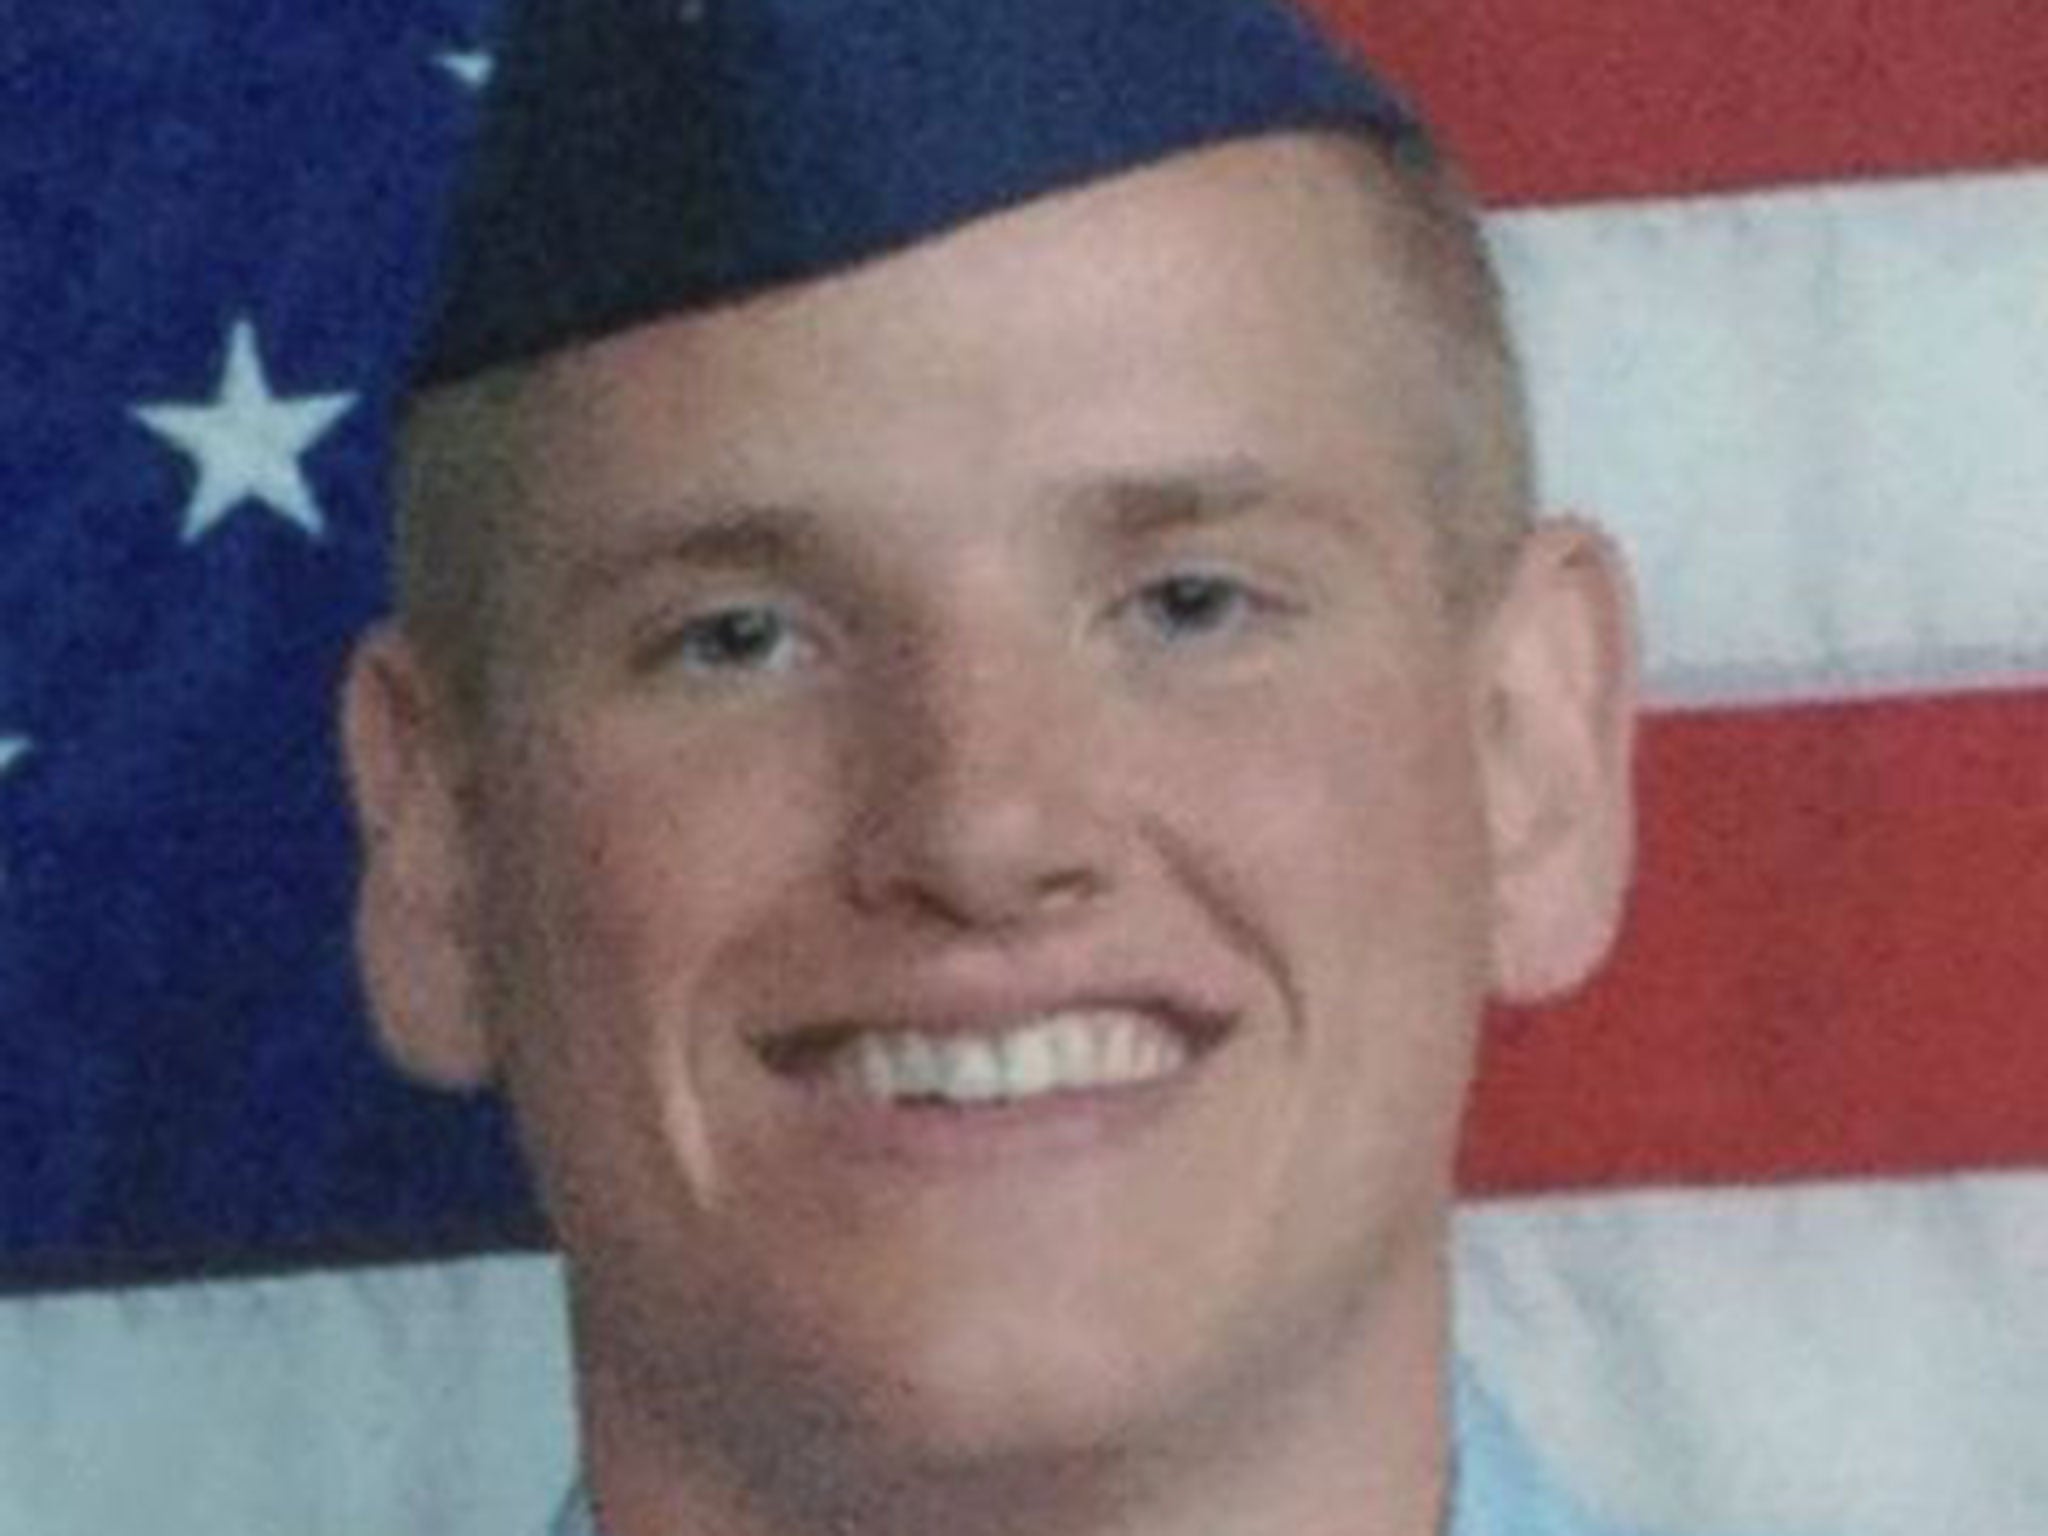 Spencer Stone is likely to be welcomed as an 'all-American hero' when he returns to the States